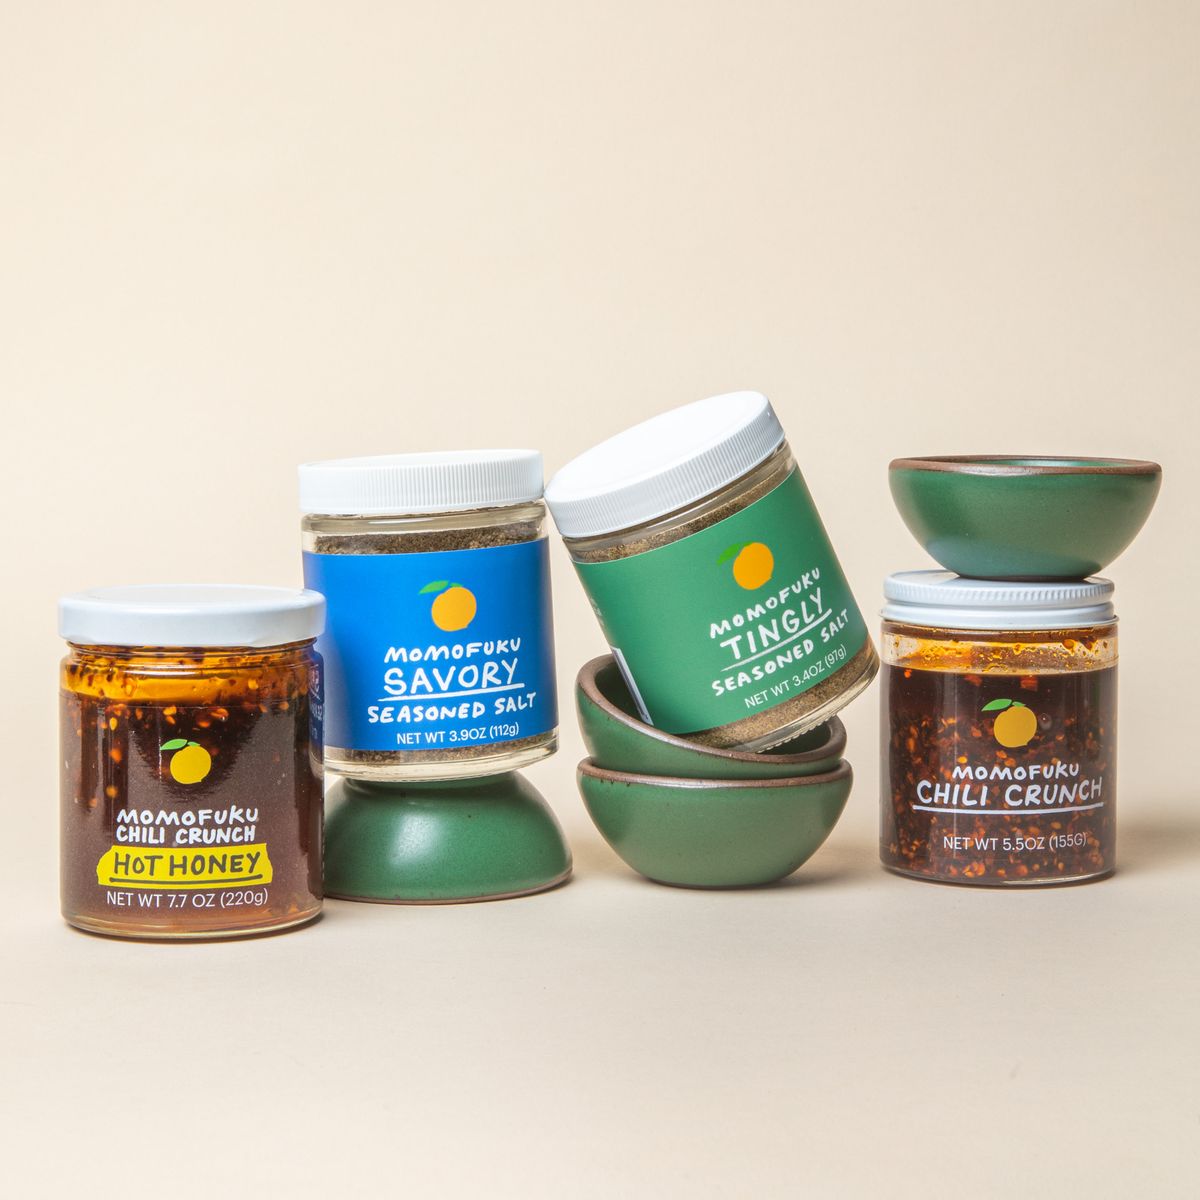 4 little ceramic bowls in a cool green color surrounded by 4 jars of Momofuku seasoned salts and chili crunch.